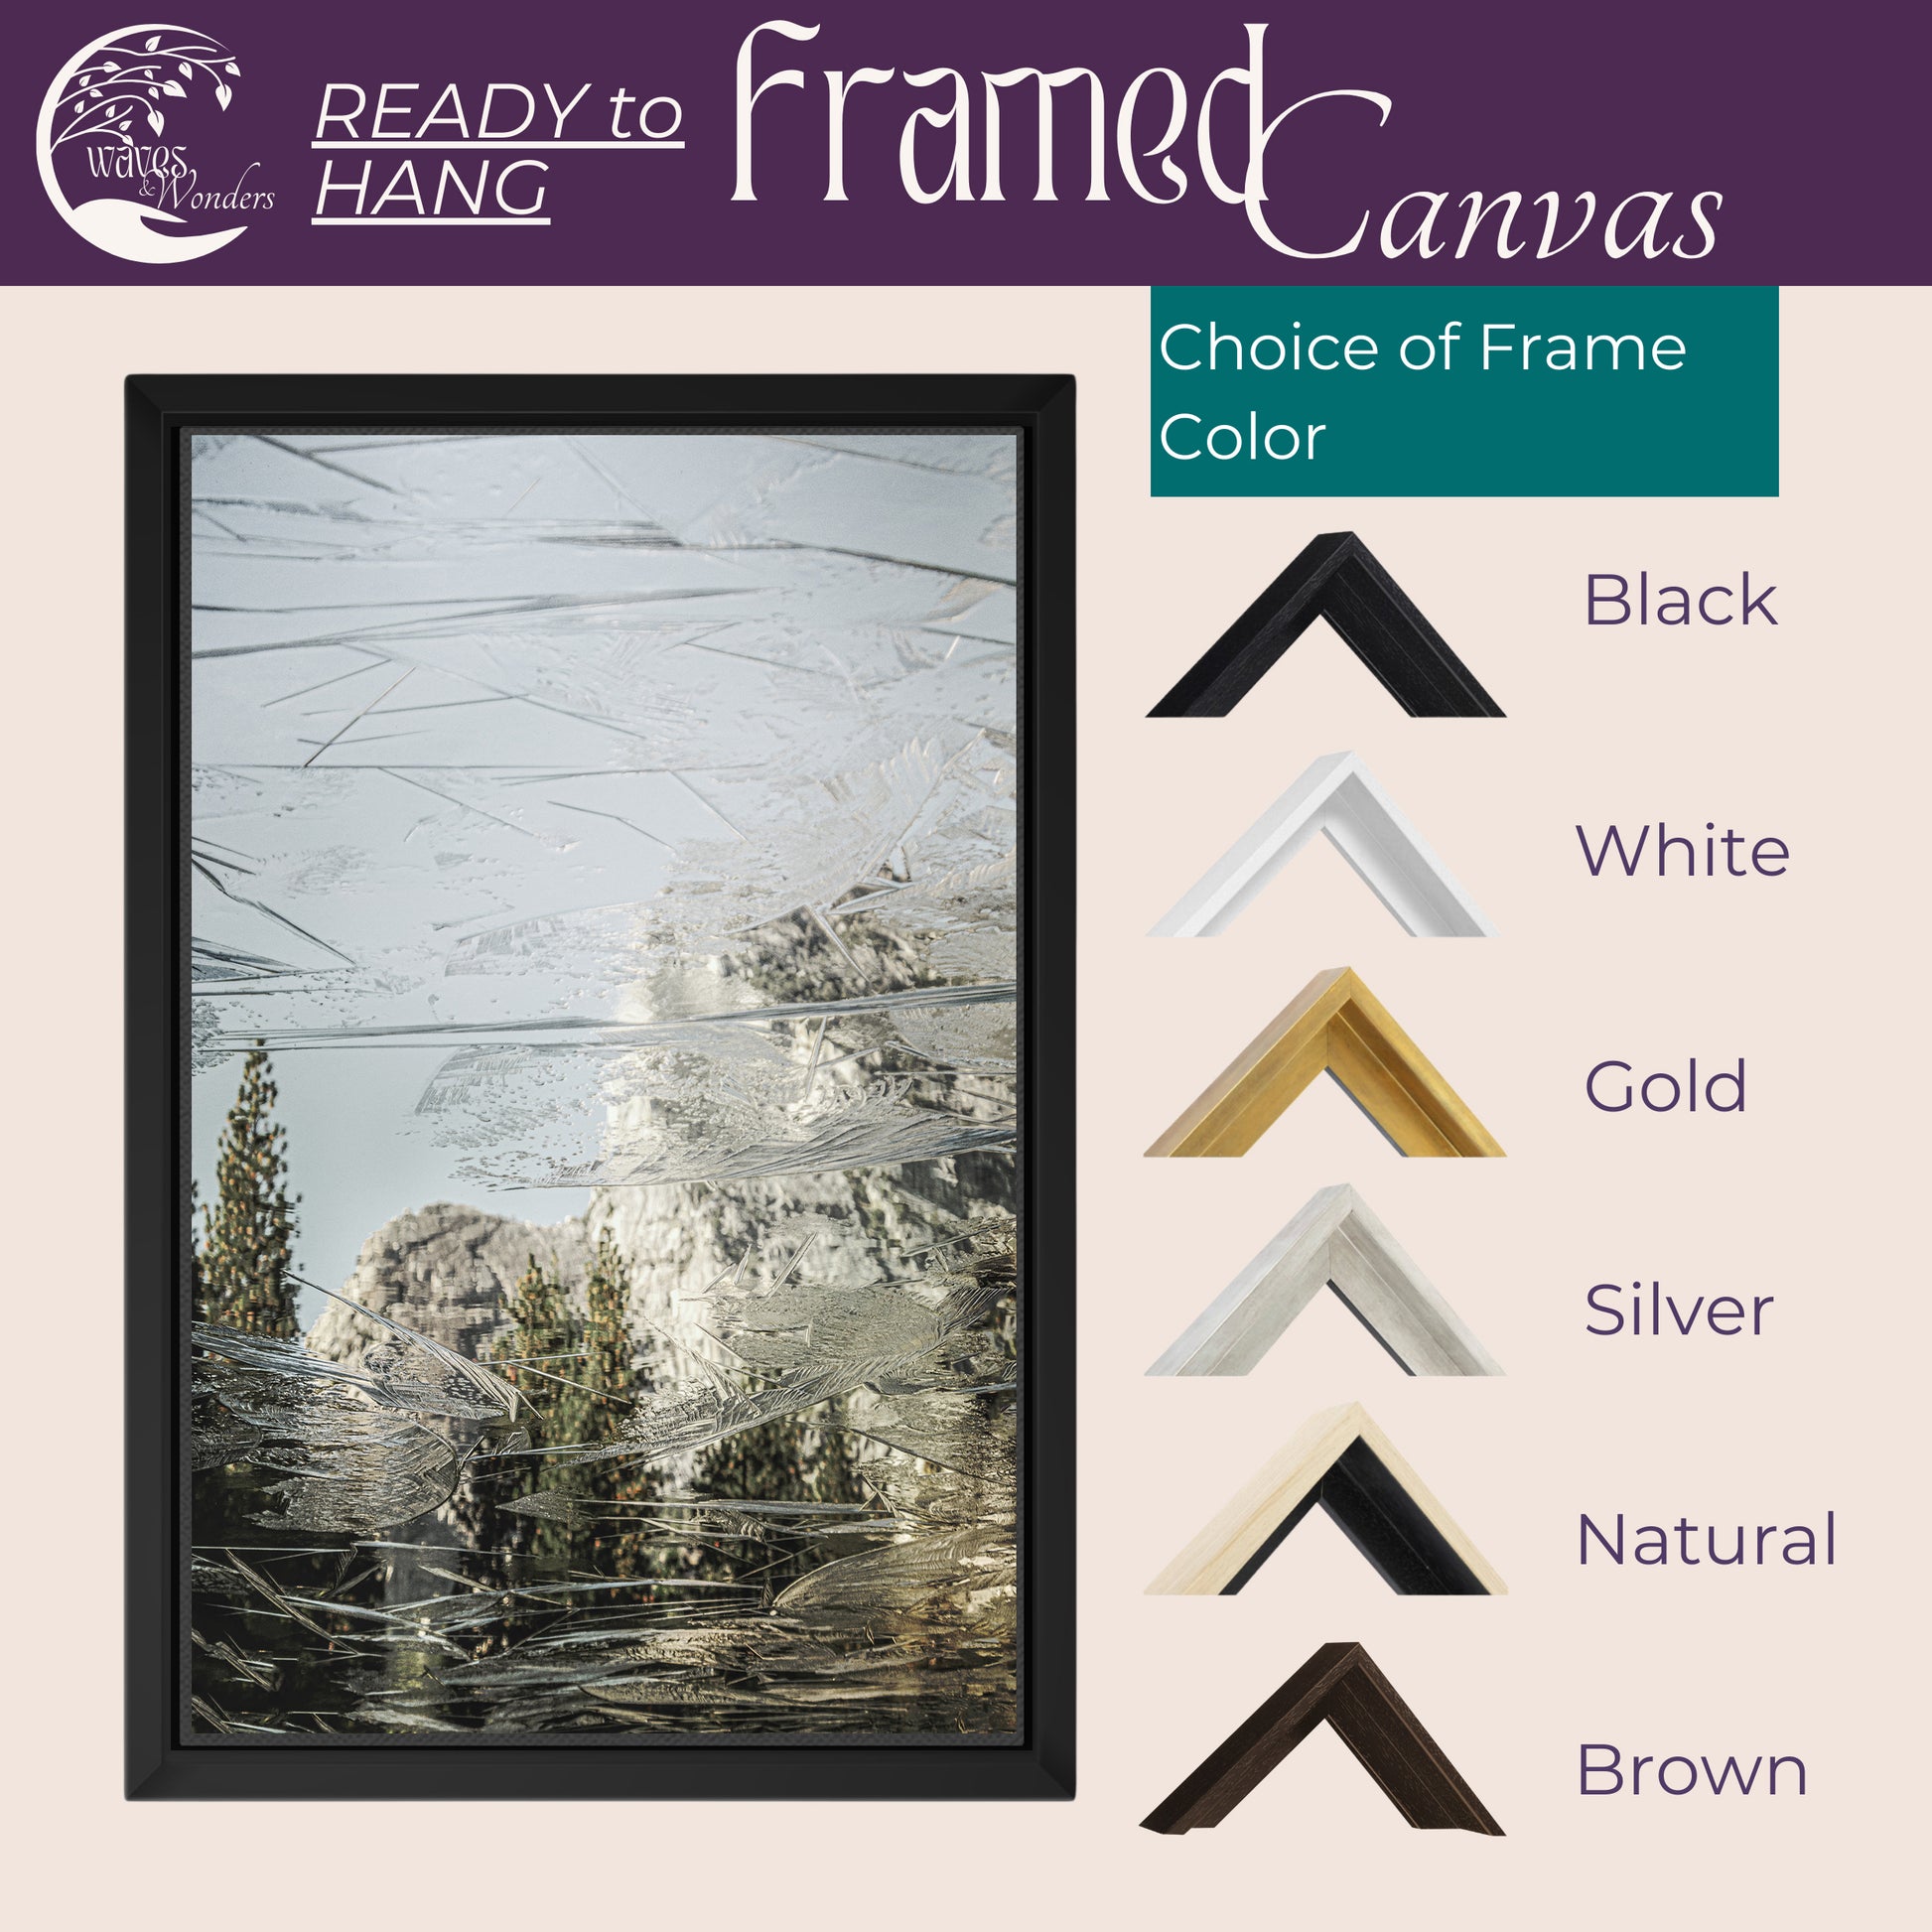 framed canvass with different colors and sizes of frames